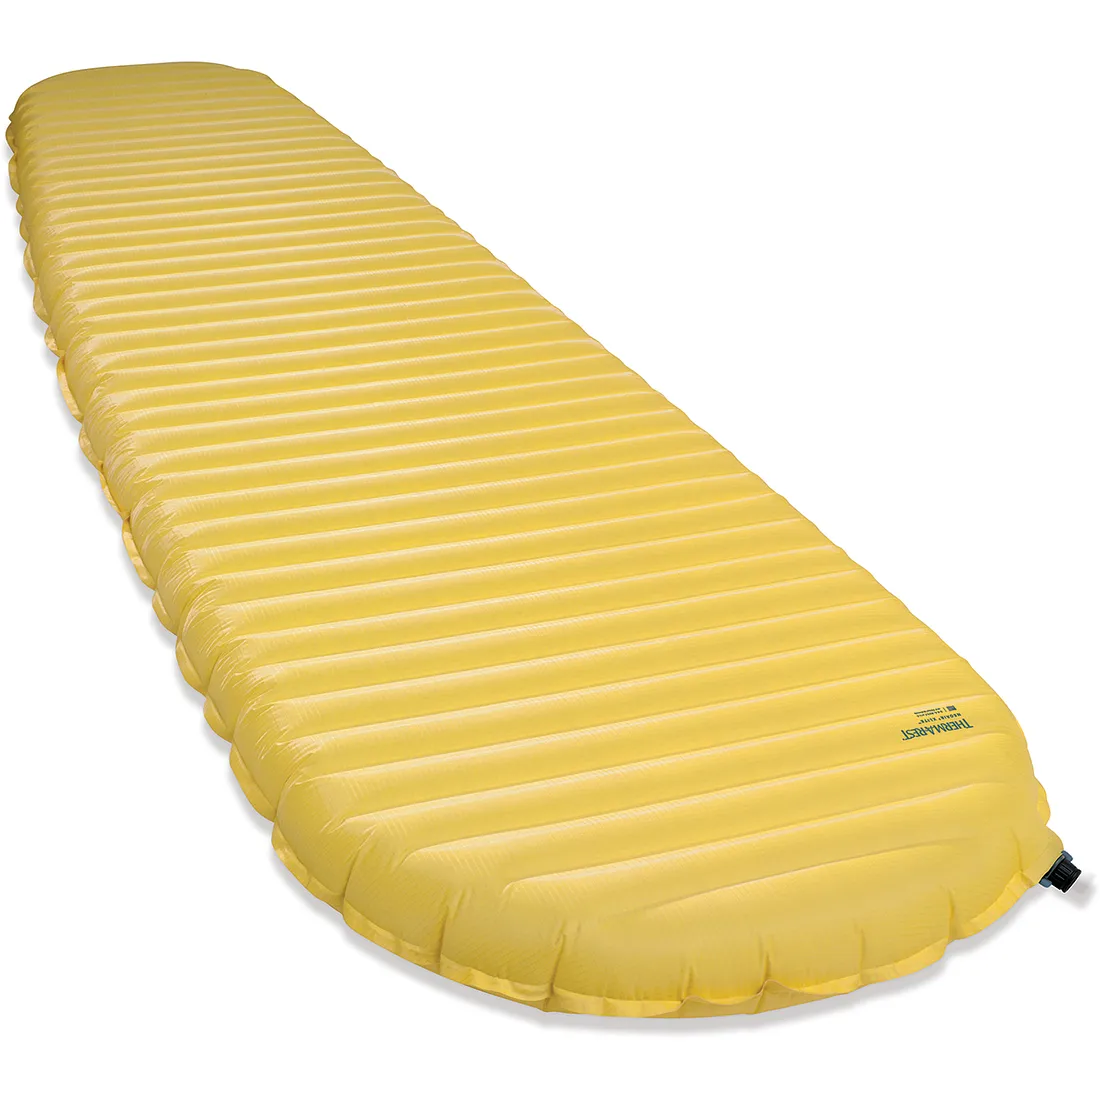 Therm-a-Rest NeoAir XLite Backpacking Sleeping Pad